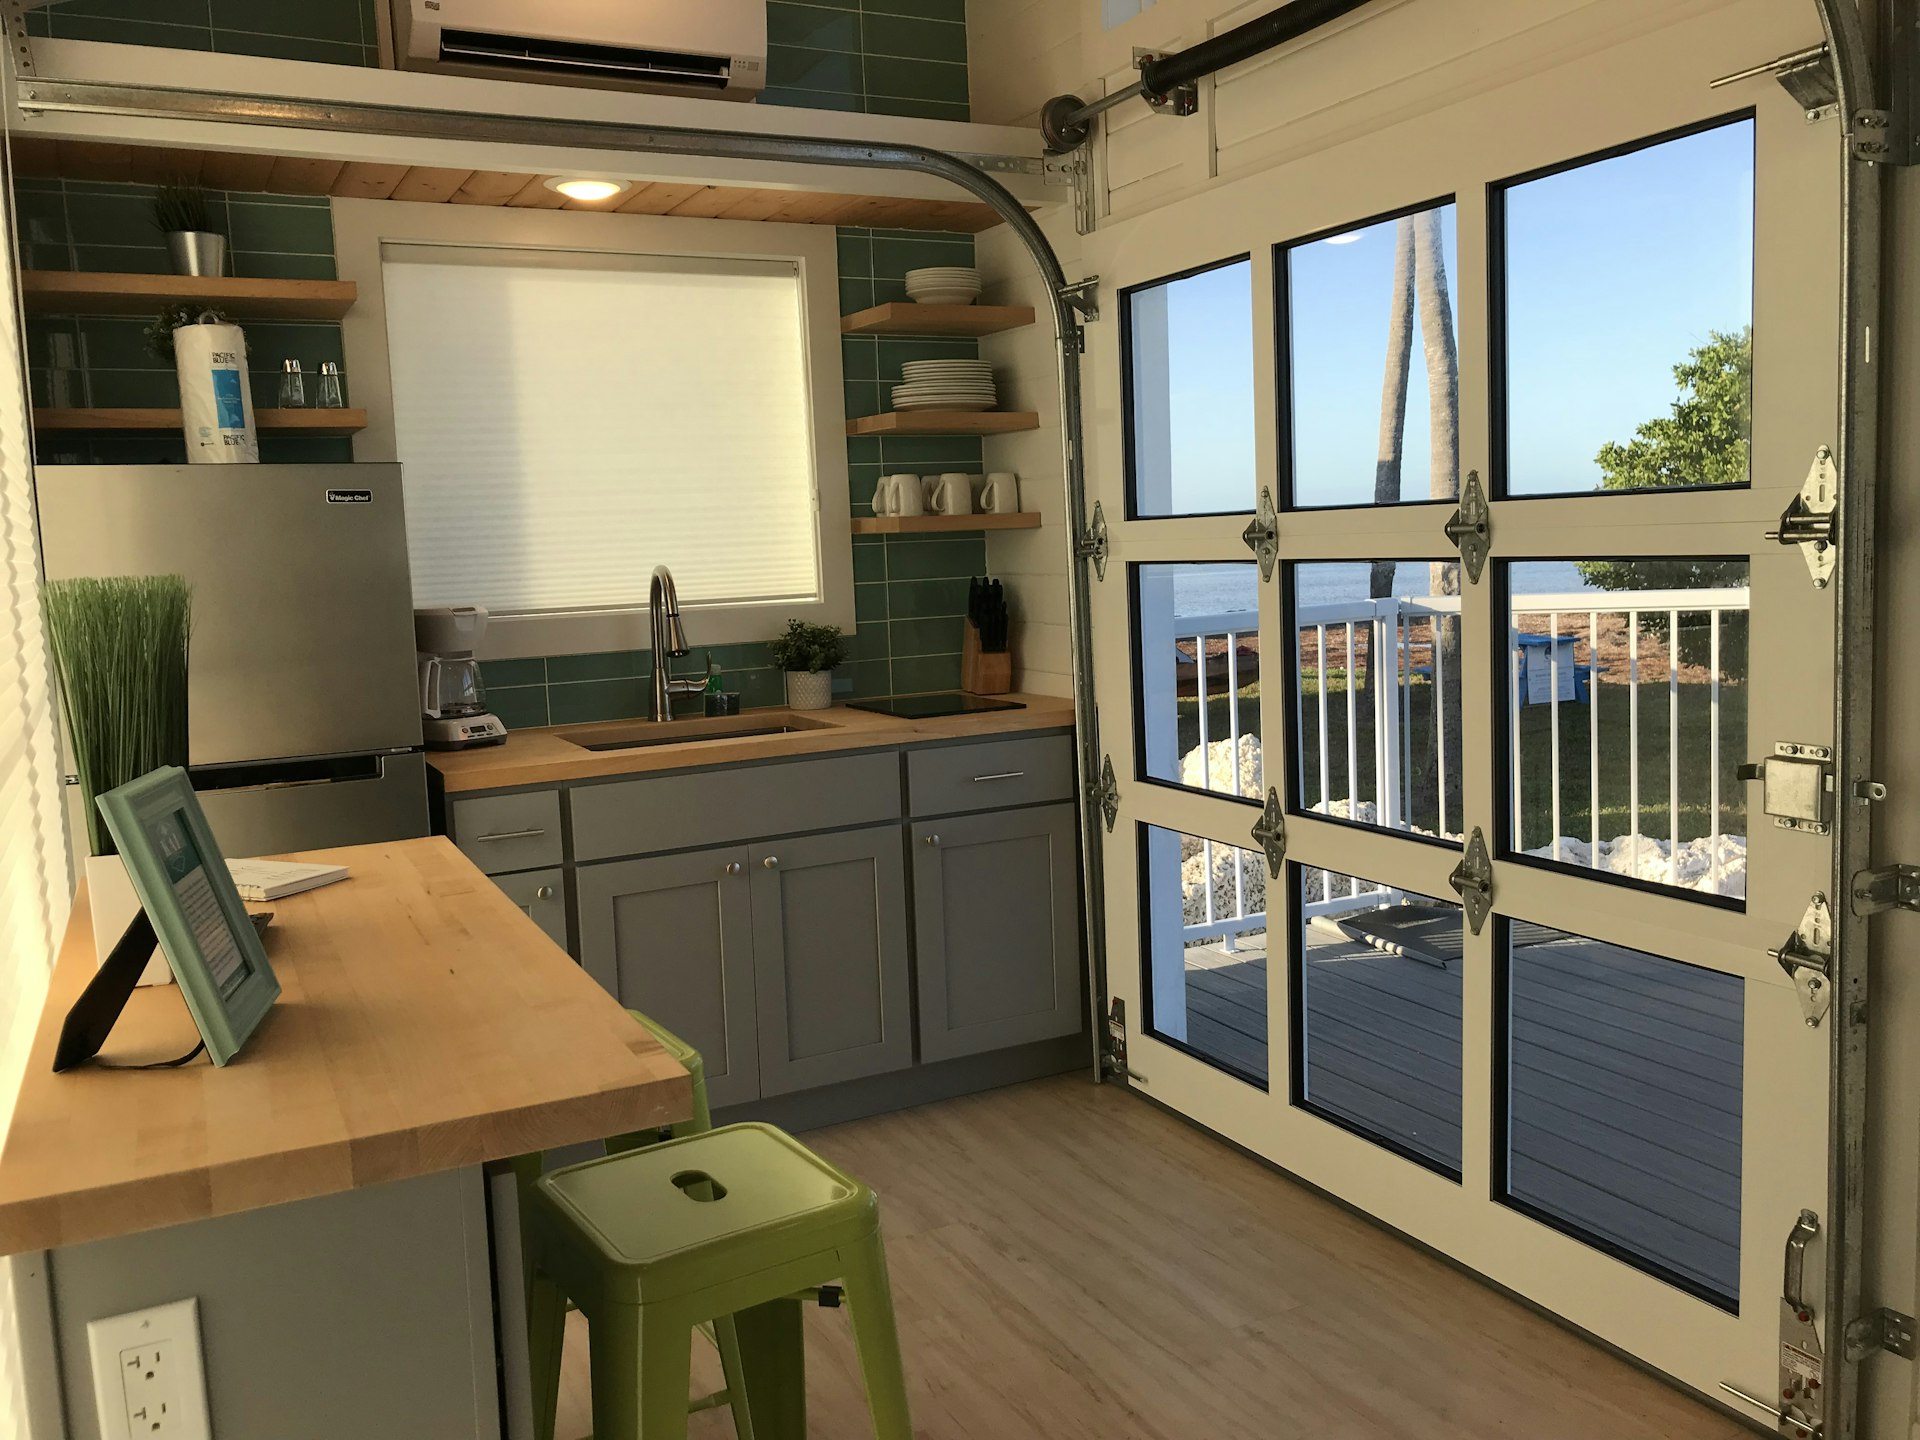 A smart interior of a tiny house, with a fully equipped kitchen and doors that open up on to a decked area.